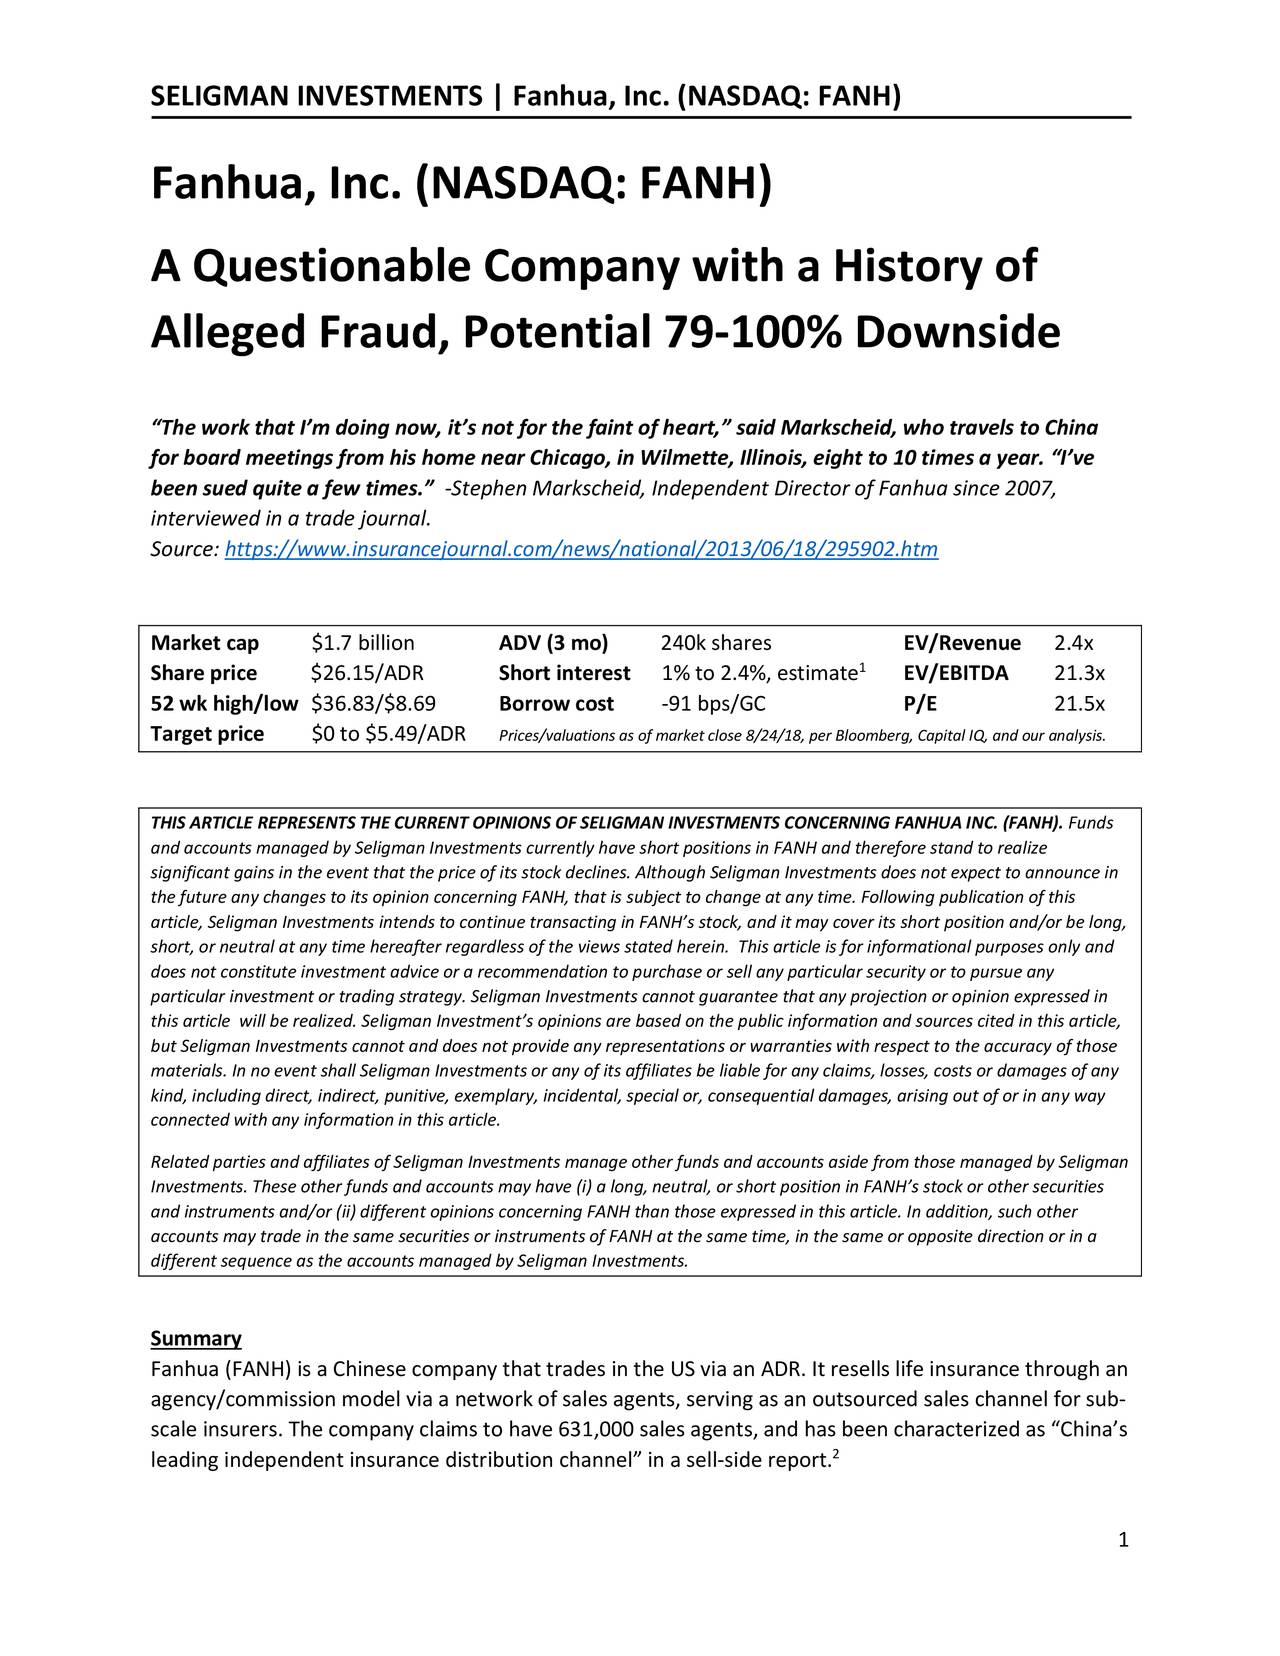 Fanhua, Inc.: A Questionable Company With A History Of Alleged Fraud, Potential 79-100 ...1280 x 1656